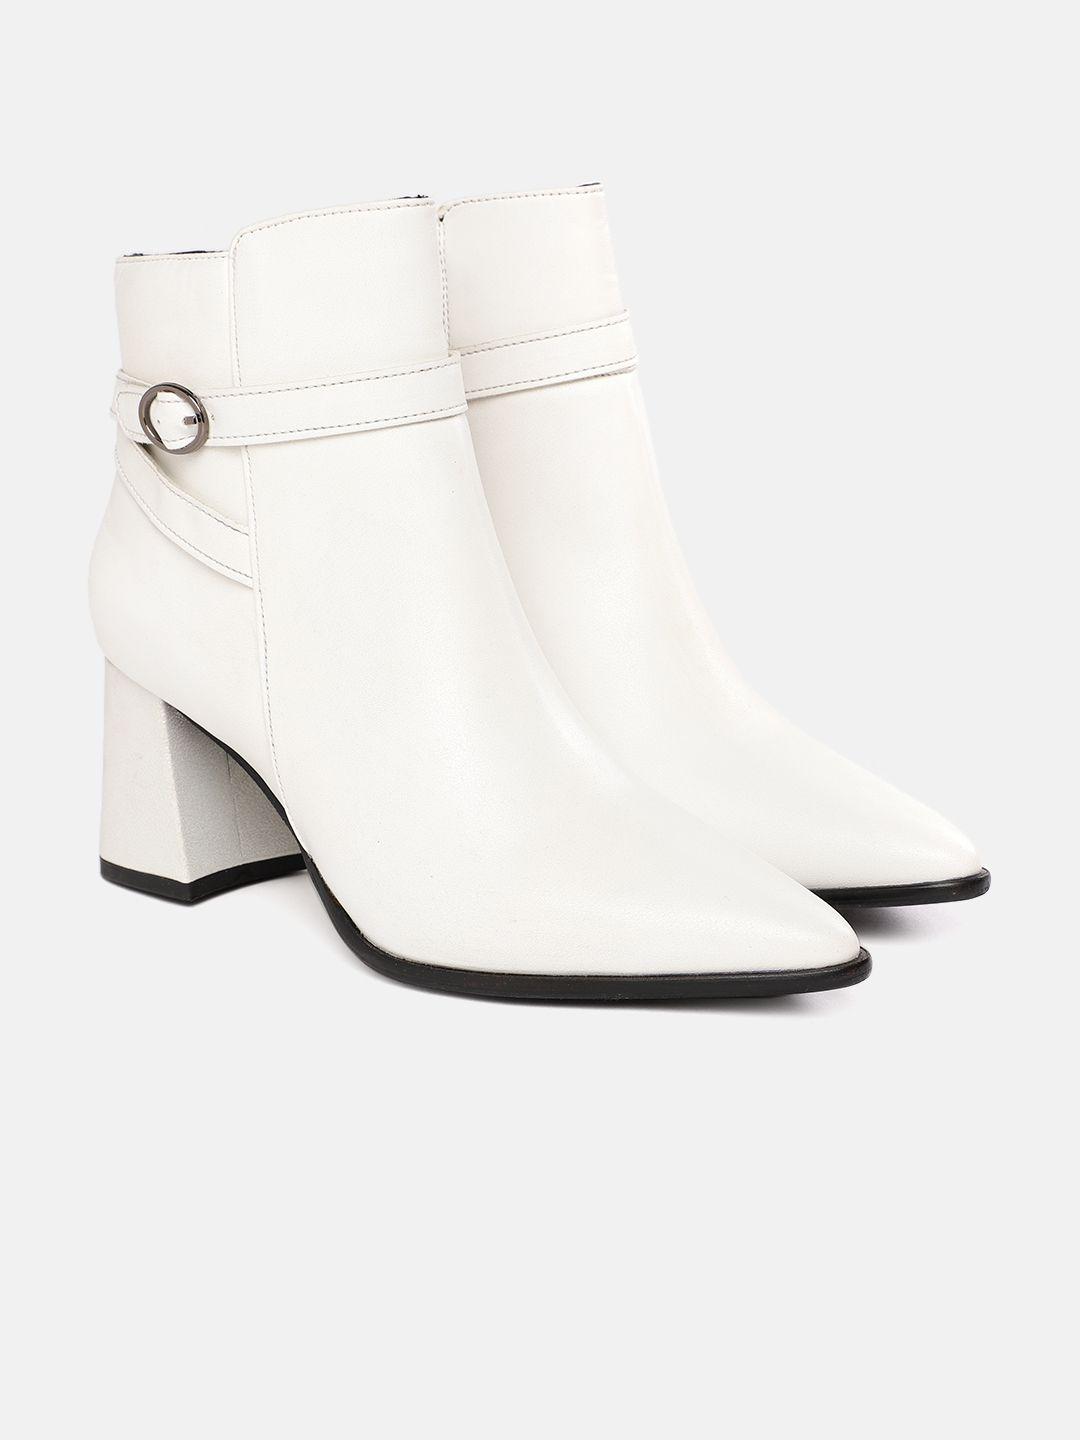 corsica white mid-top block heeled boots